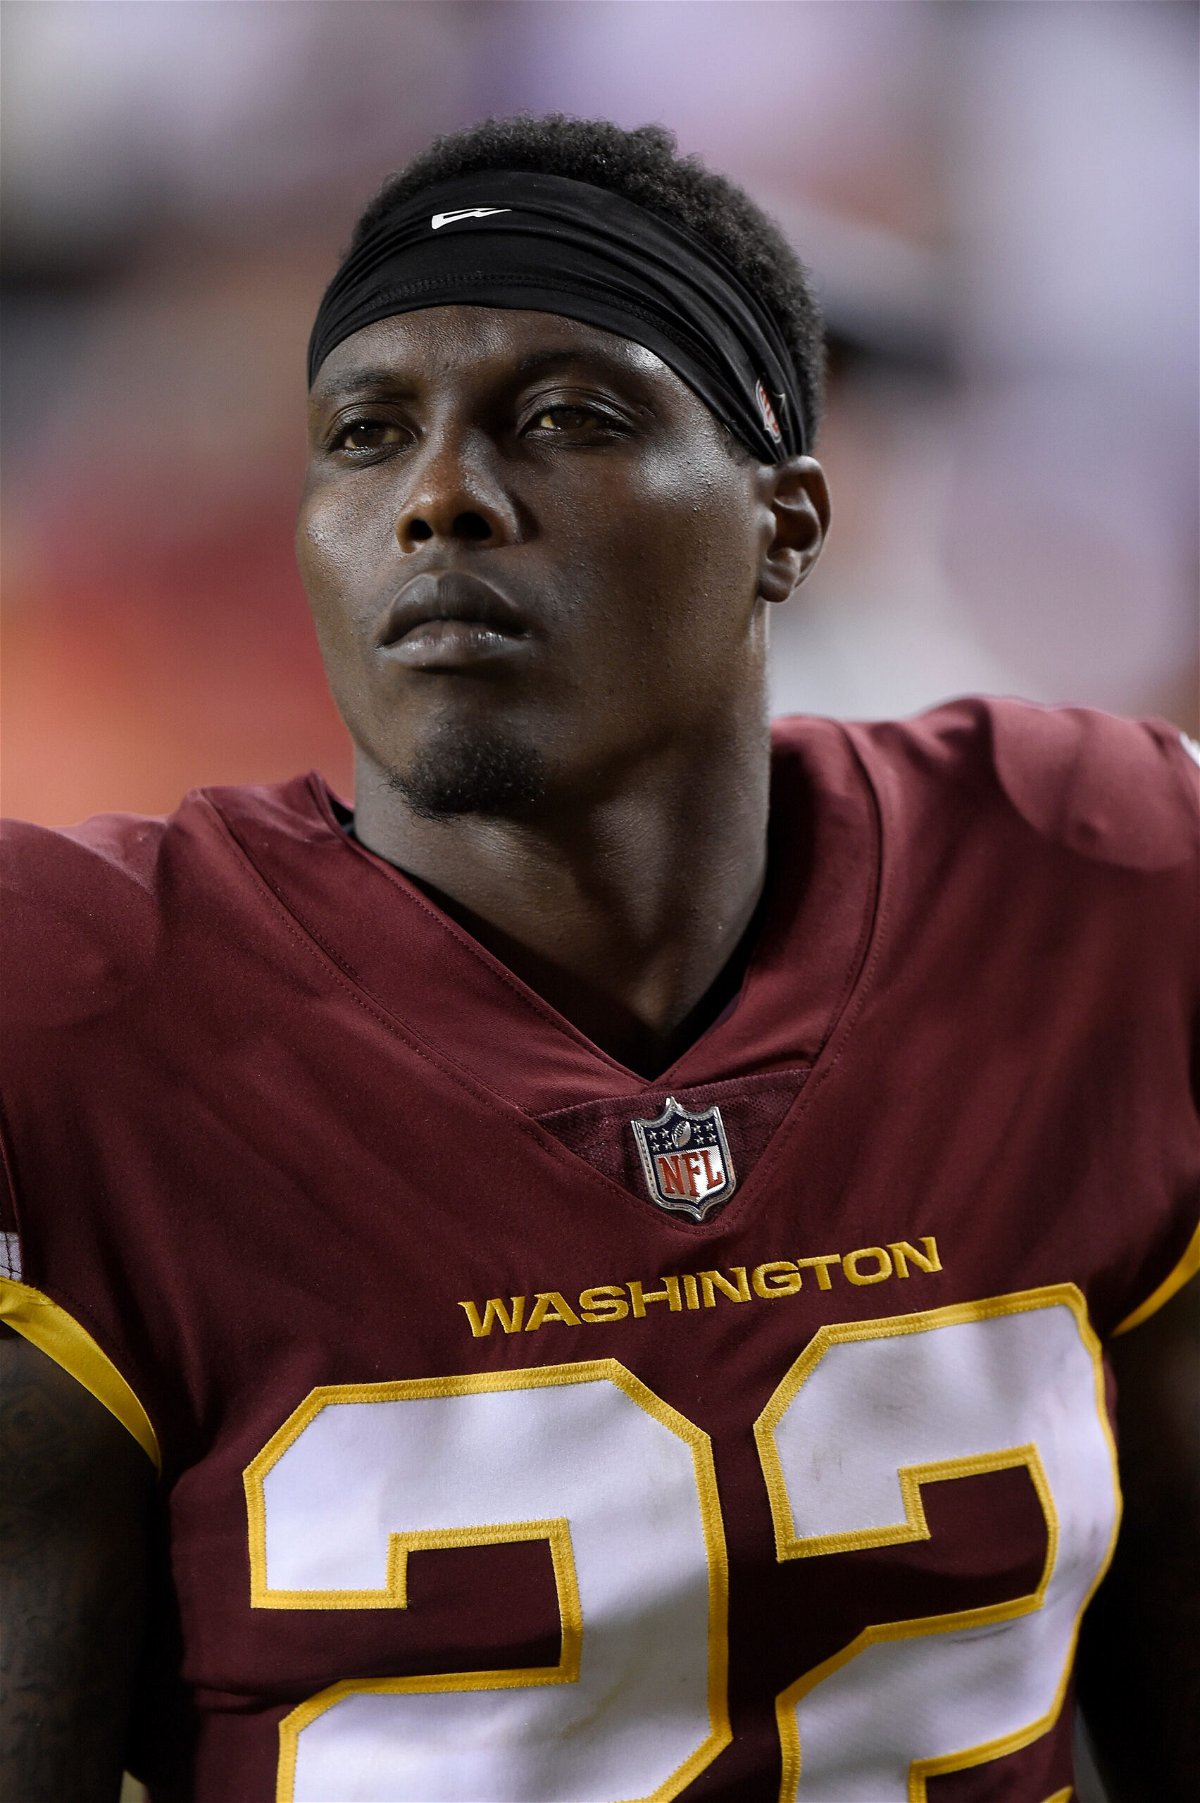 <i>Greg Fiume/Getty Images</i><br/>Washington Football Team player Deshazor Everett is being treated for 